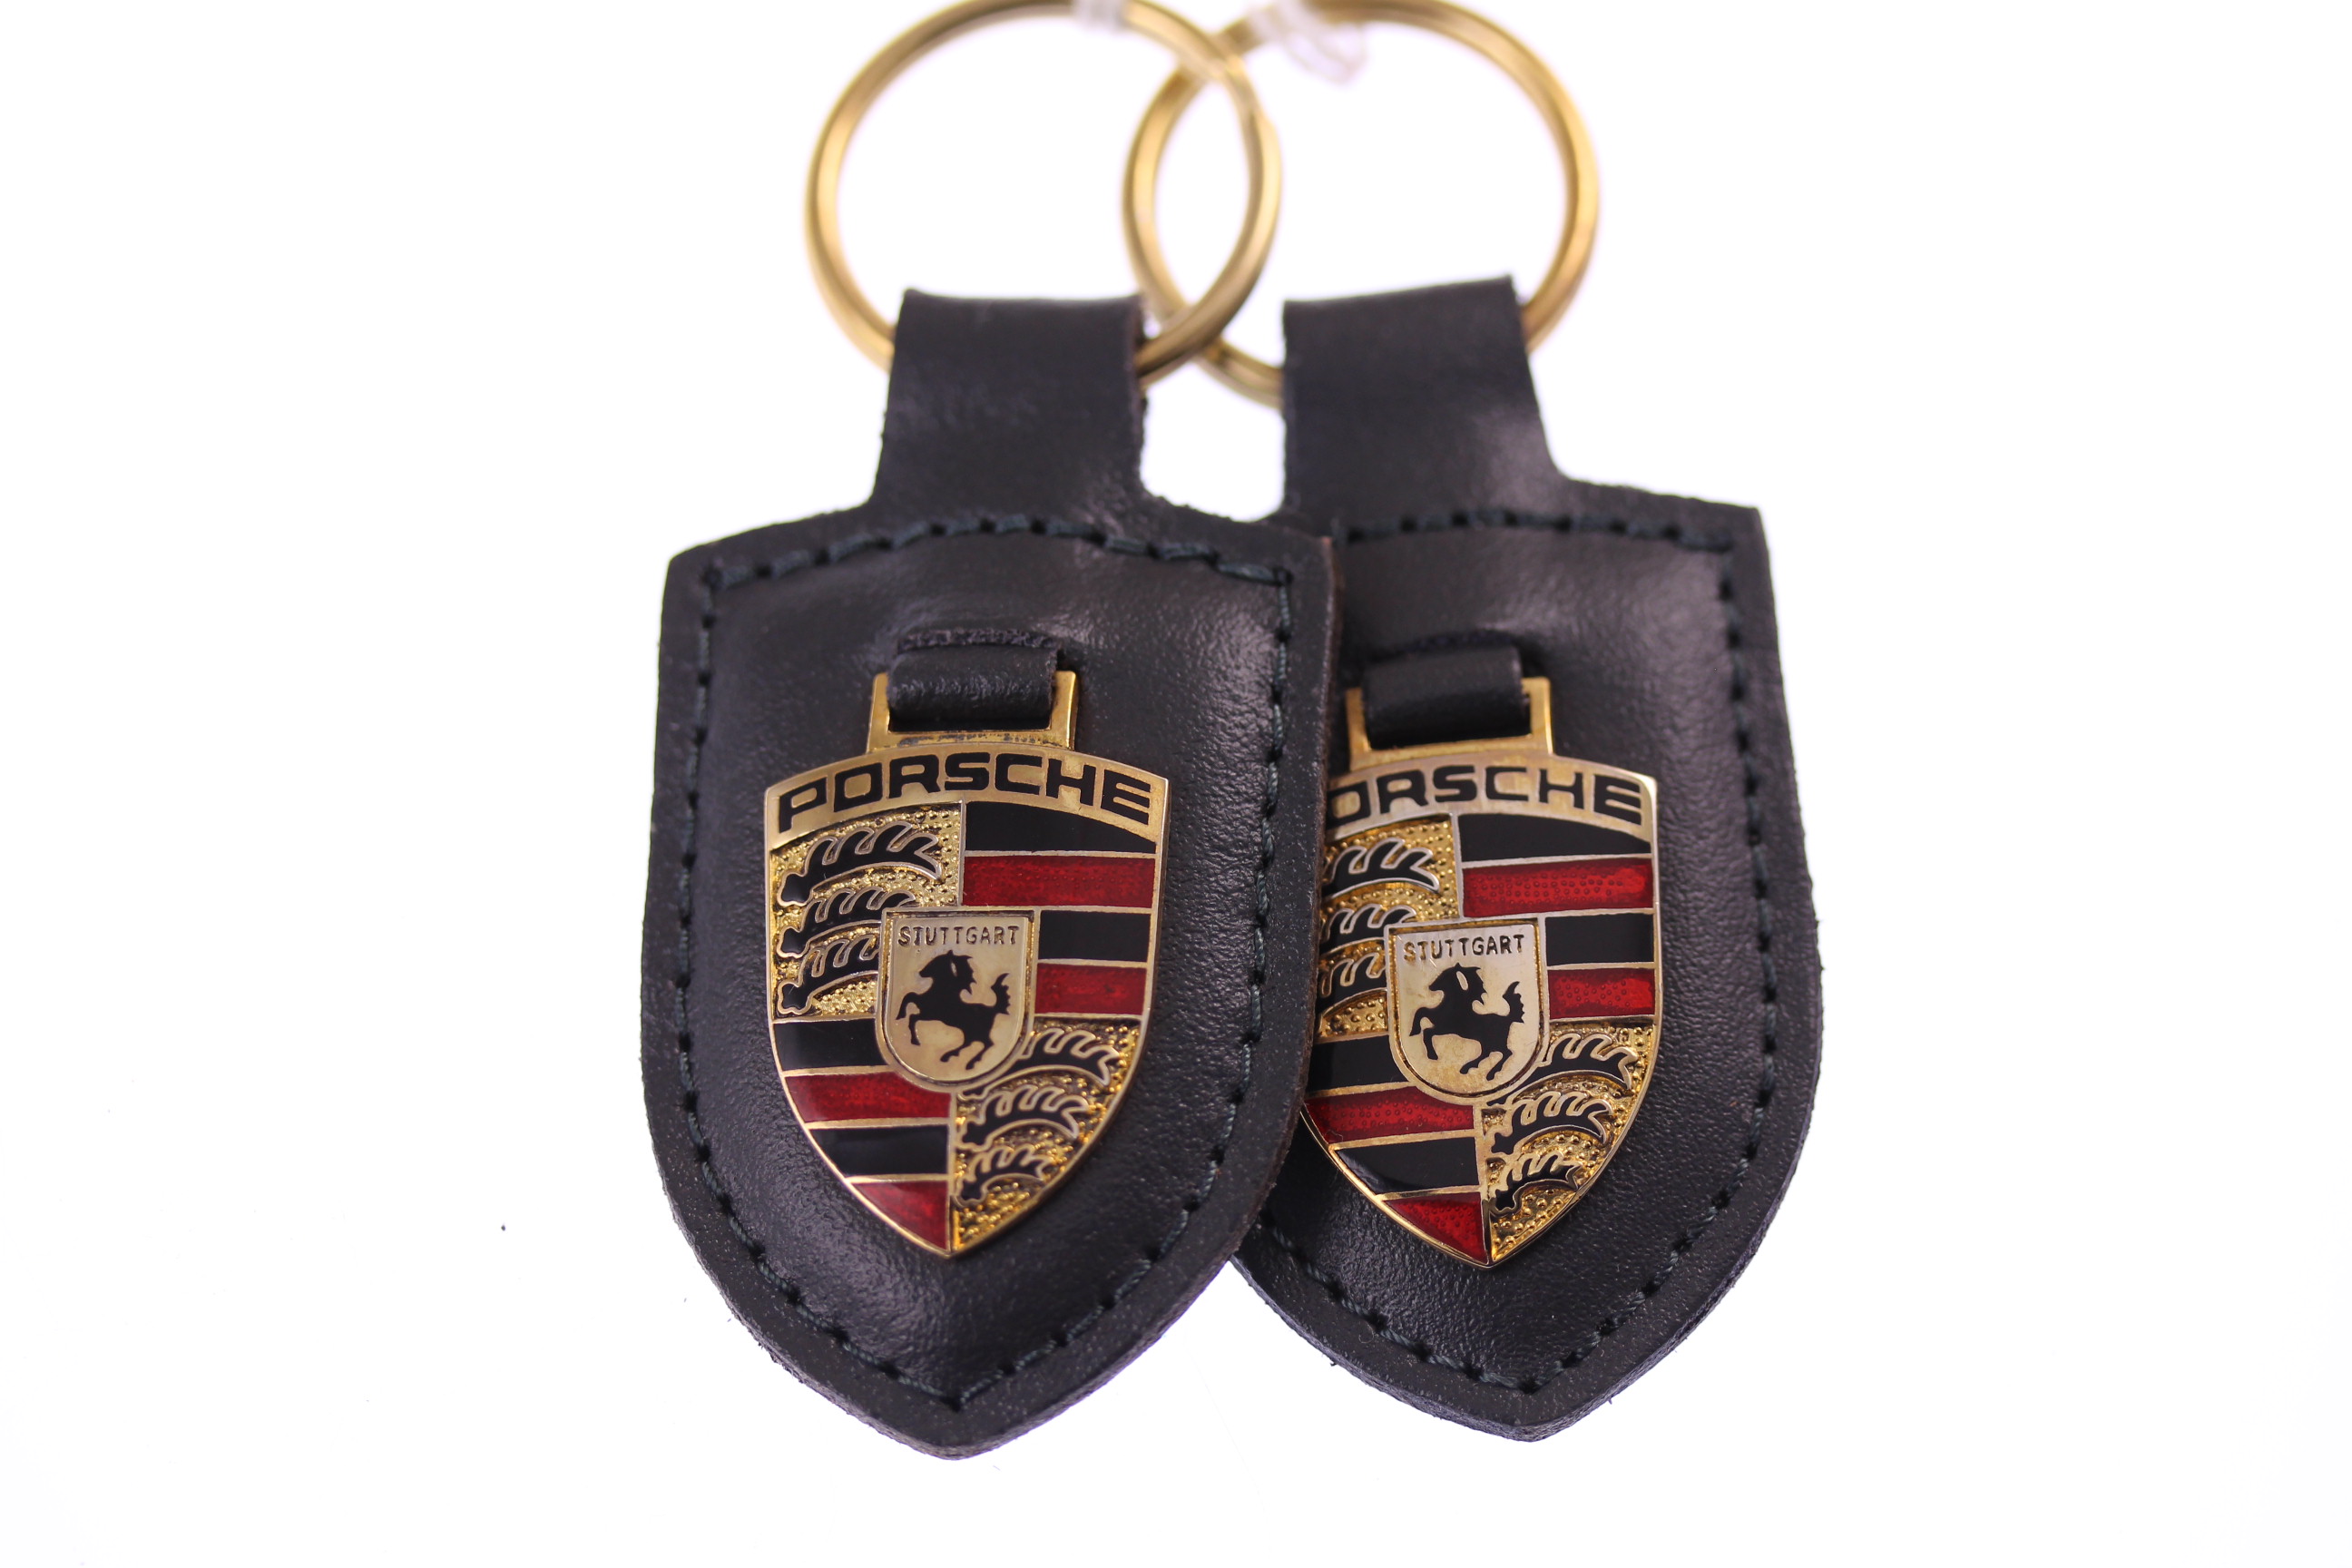 Porsche – original vintage new old stock 1990s vitreous enamel 'heubach'  hinged crest keyring with slate grey leather keyfob – Classic Leather Fobs